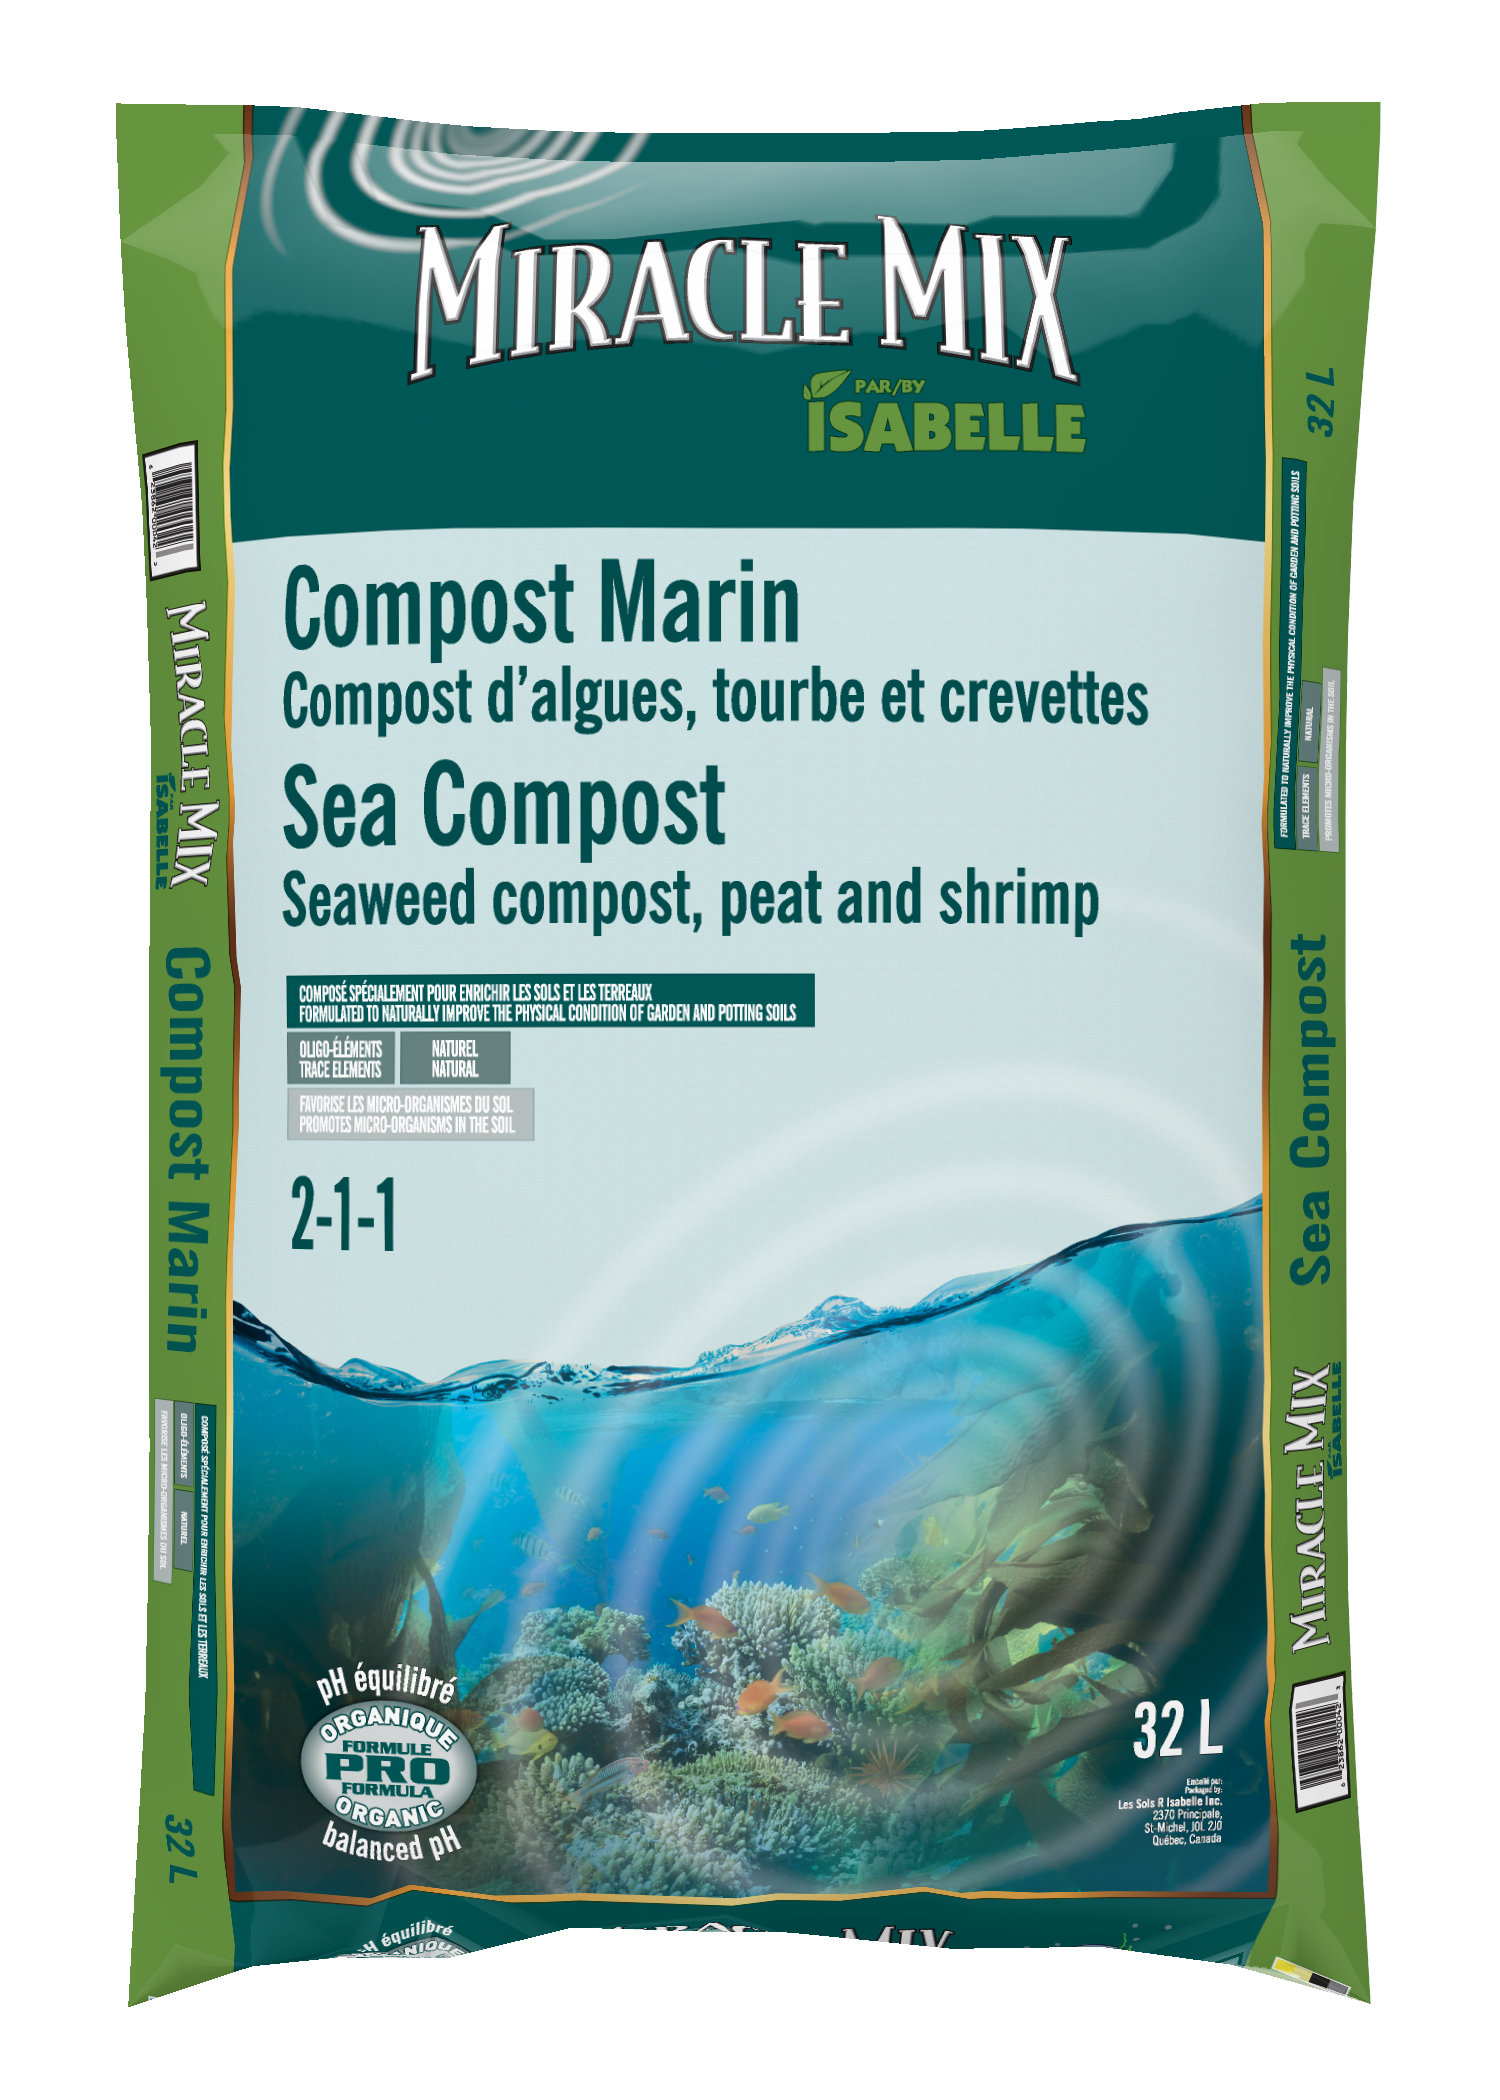 140690 Miracle Mix Marine Compost_R6V0_3D